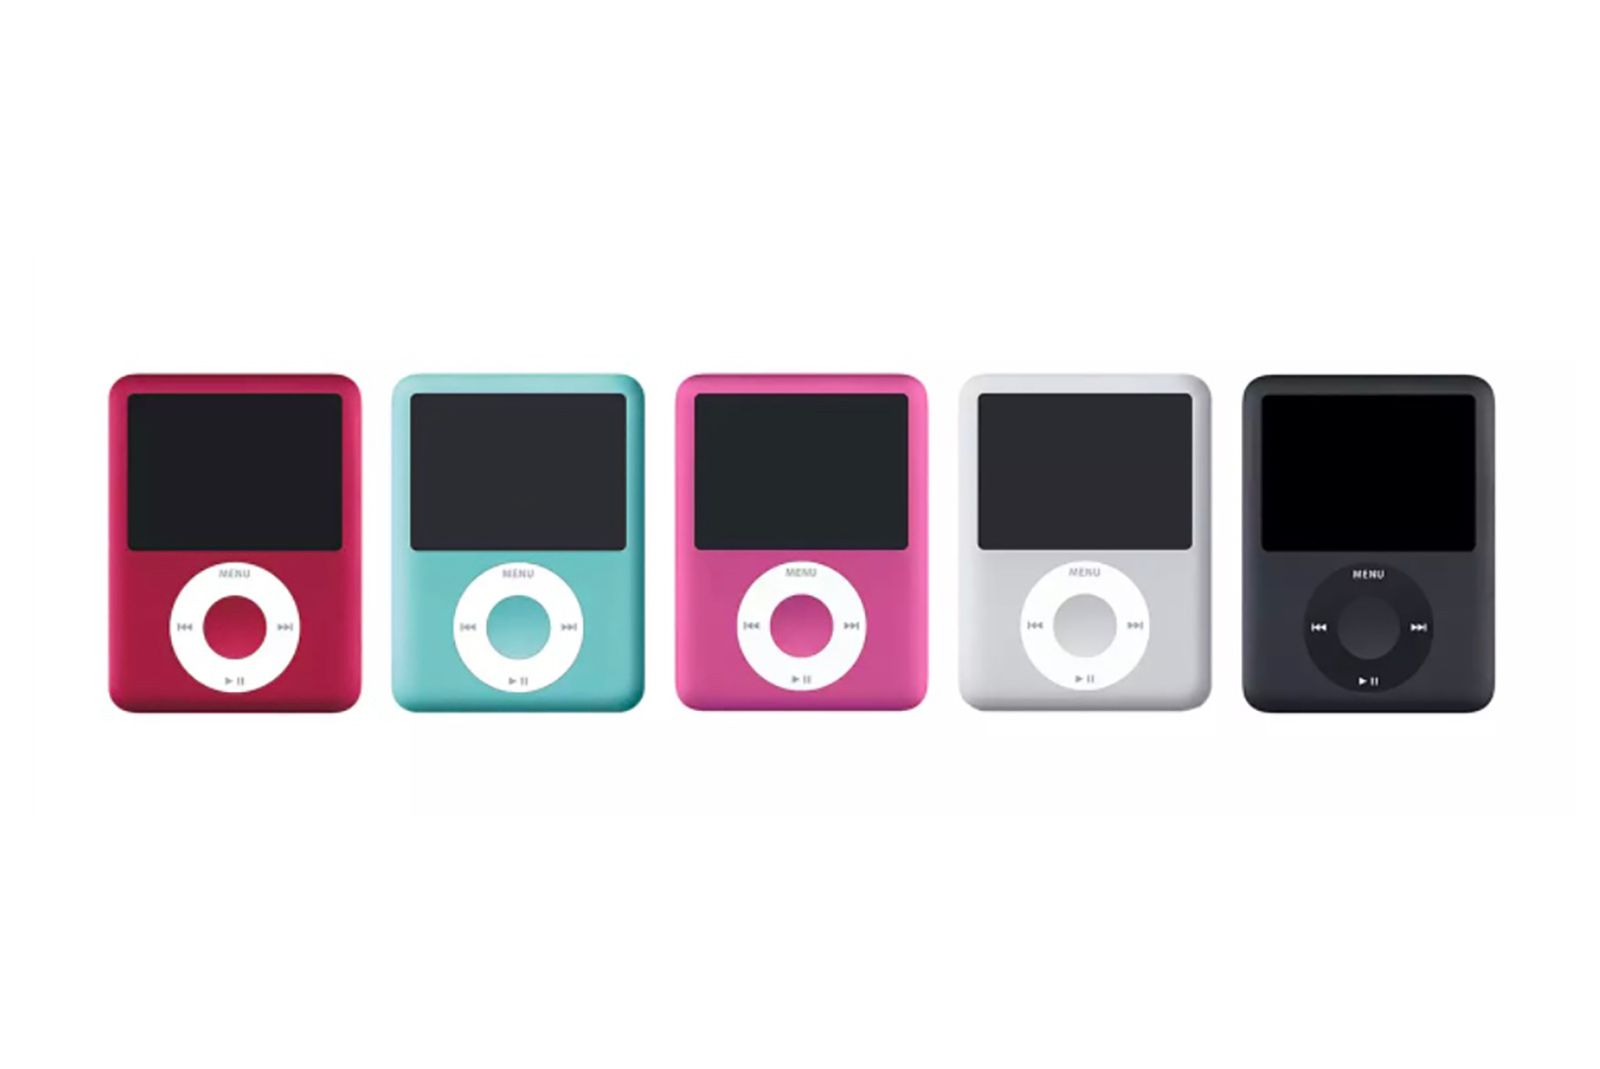 Every Apple iPod Model over the years (2001 to 2022) photo 13